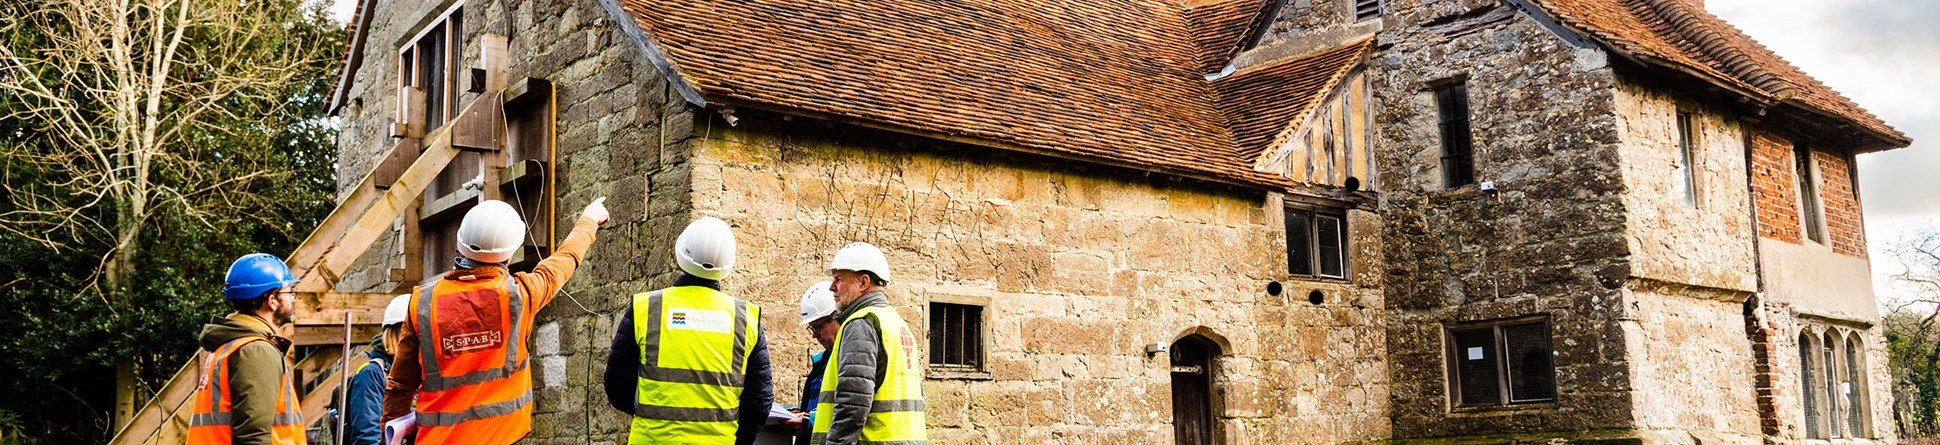 A group of people in hard hats and high-vis jackets look at an old stone building.